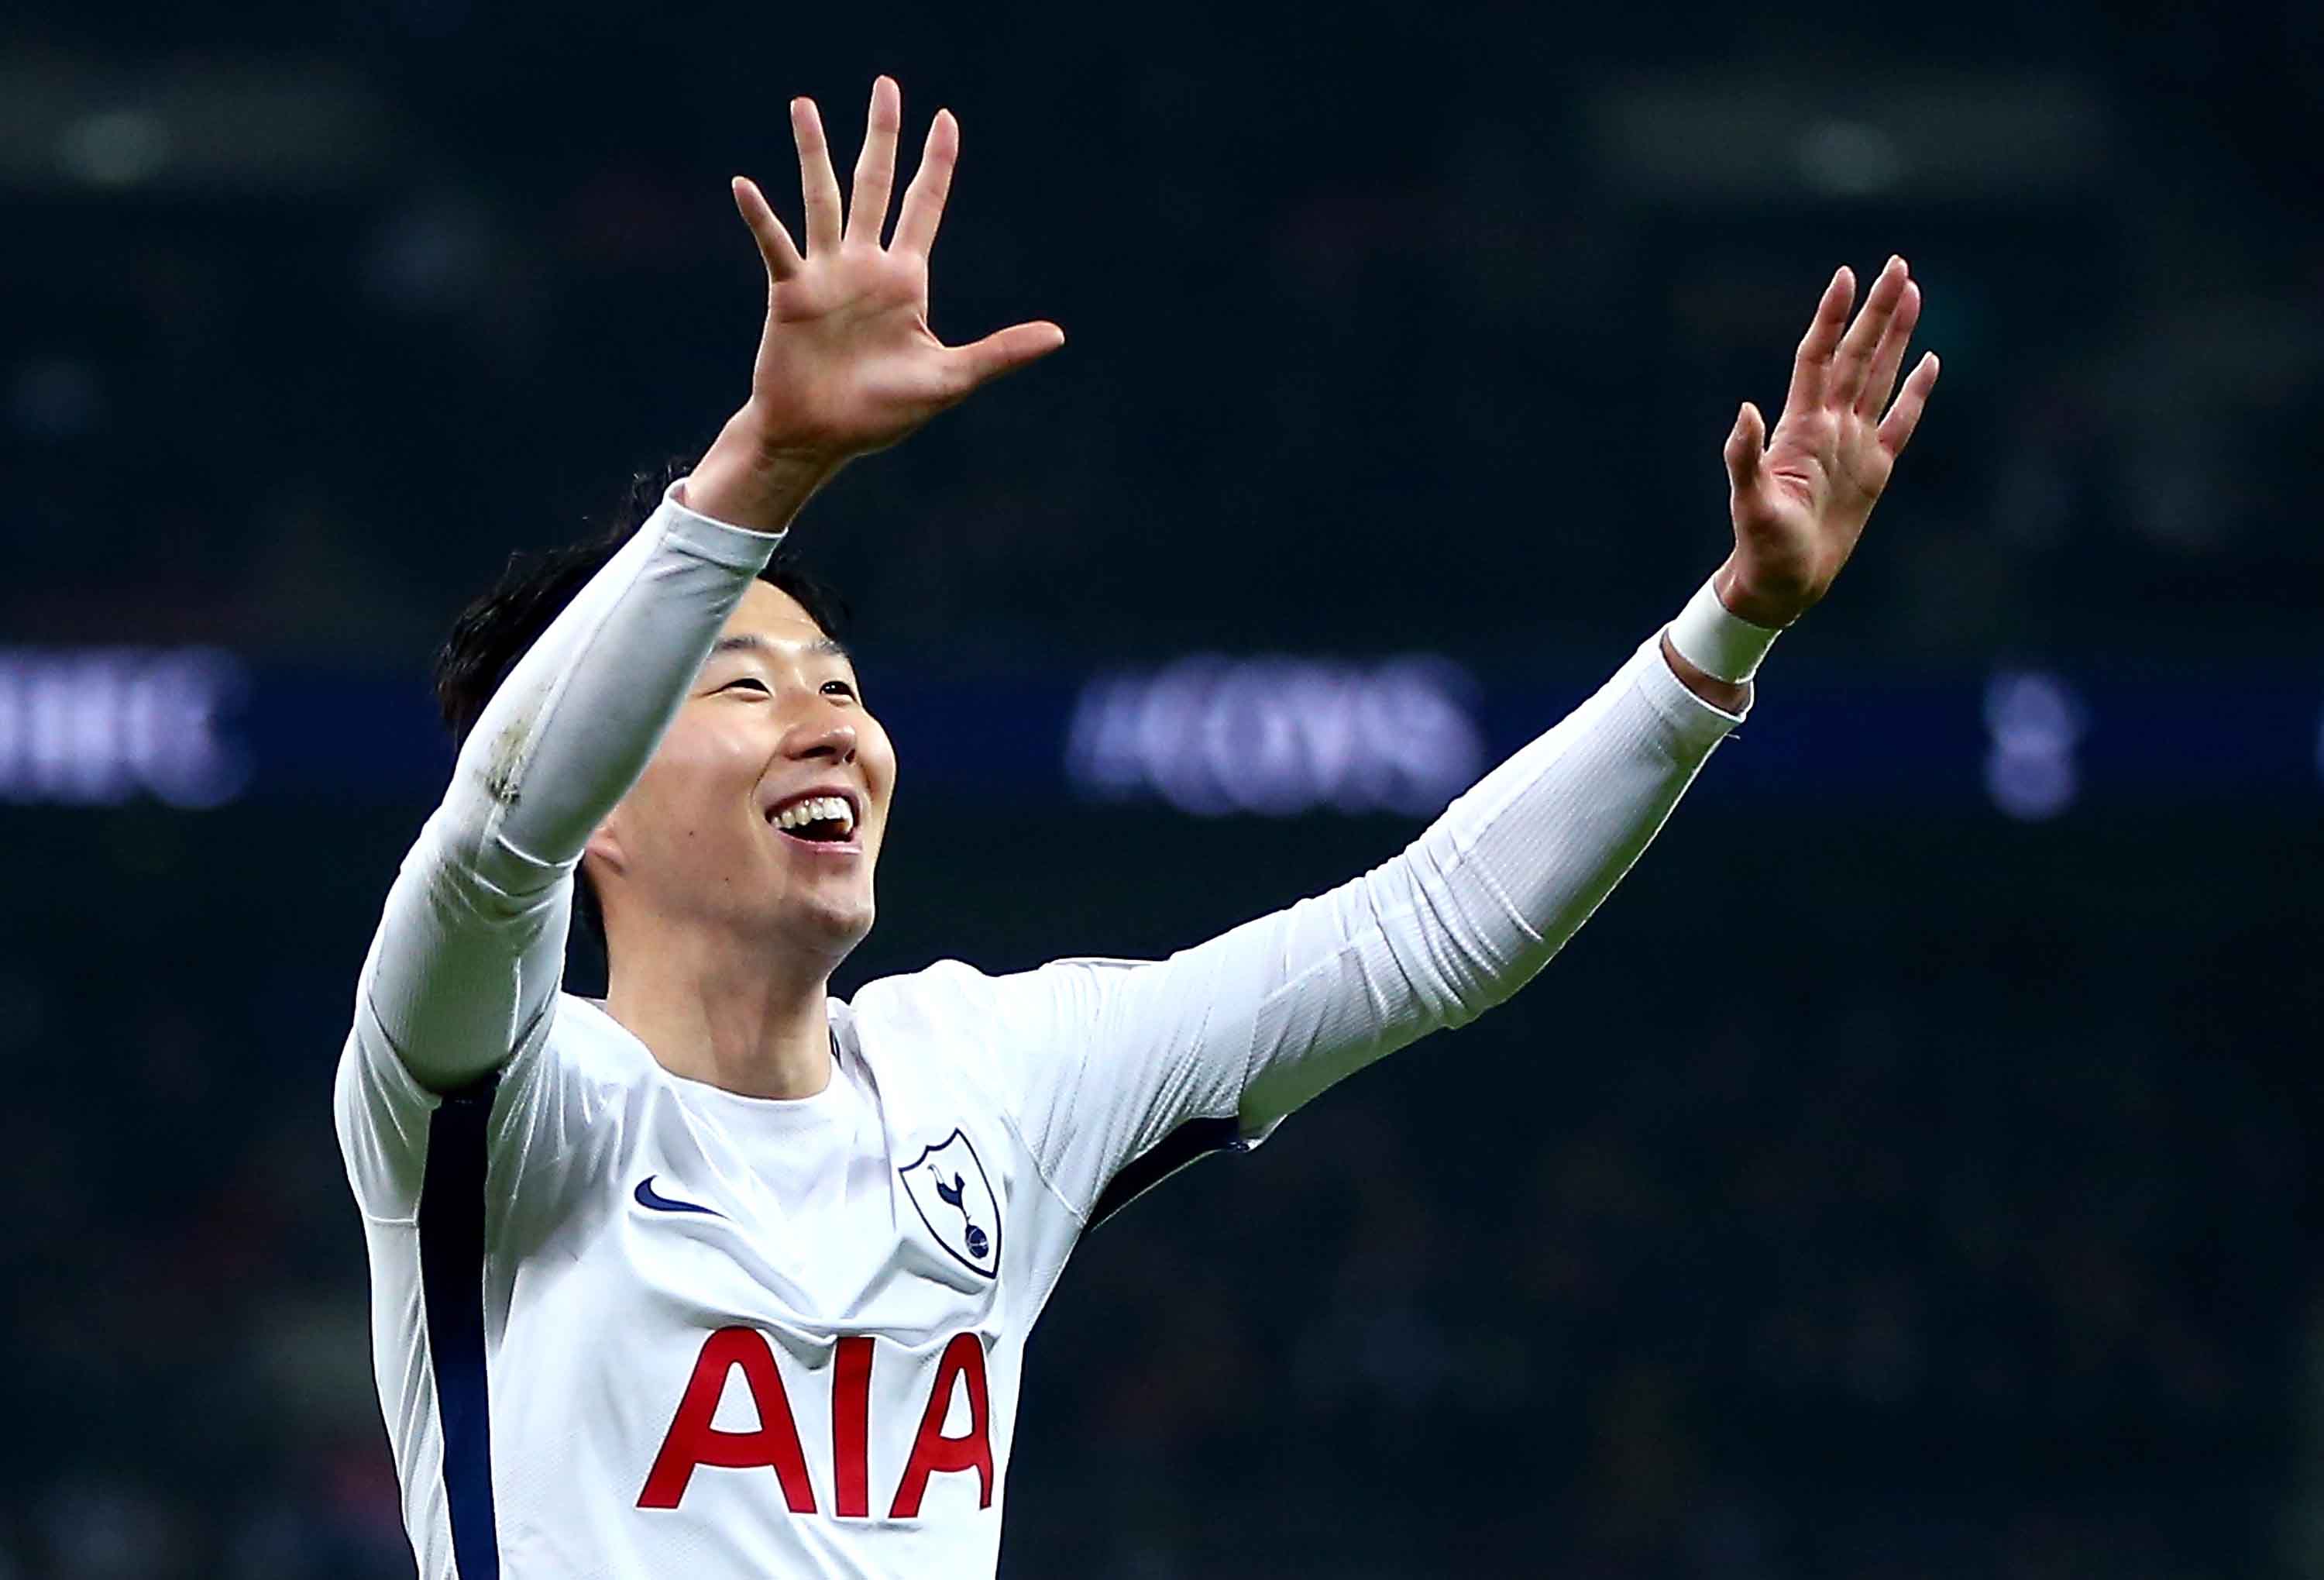 Super Sub Heung-Min Son, Son Heung-min, It never takes long for Heung Min  Son to make an impact 🌞 🔥, By Tottenham Hotspur